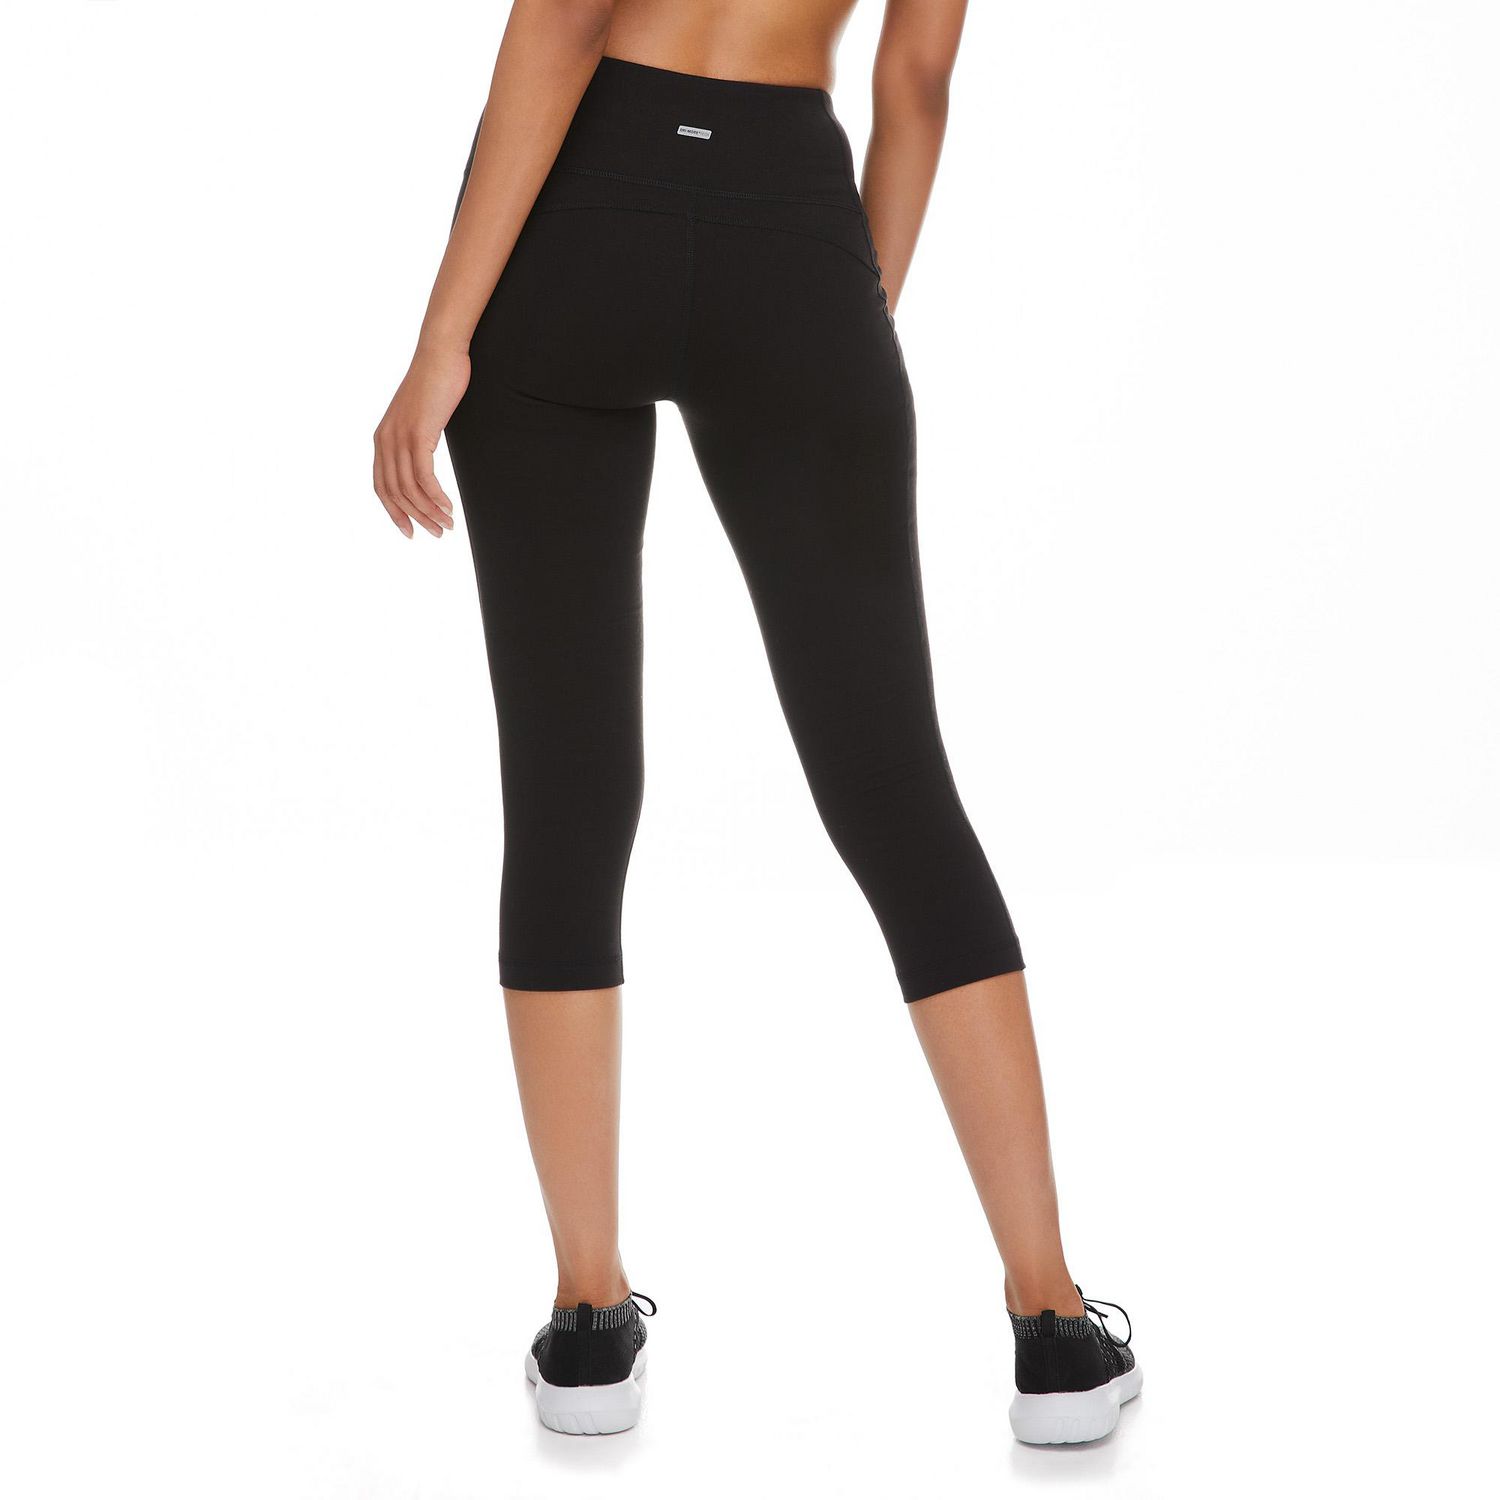 Wholesale Summer Womens High Waist Capri Leggings With Pockets In Capri And  Full Length With Buttery Soft 3 WaISTband For Sports, Running, And Fitness  Quick Dry And Conceited From Bikini_designer, $21.11